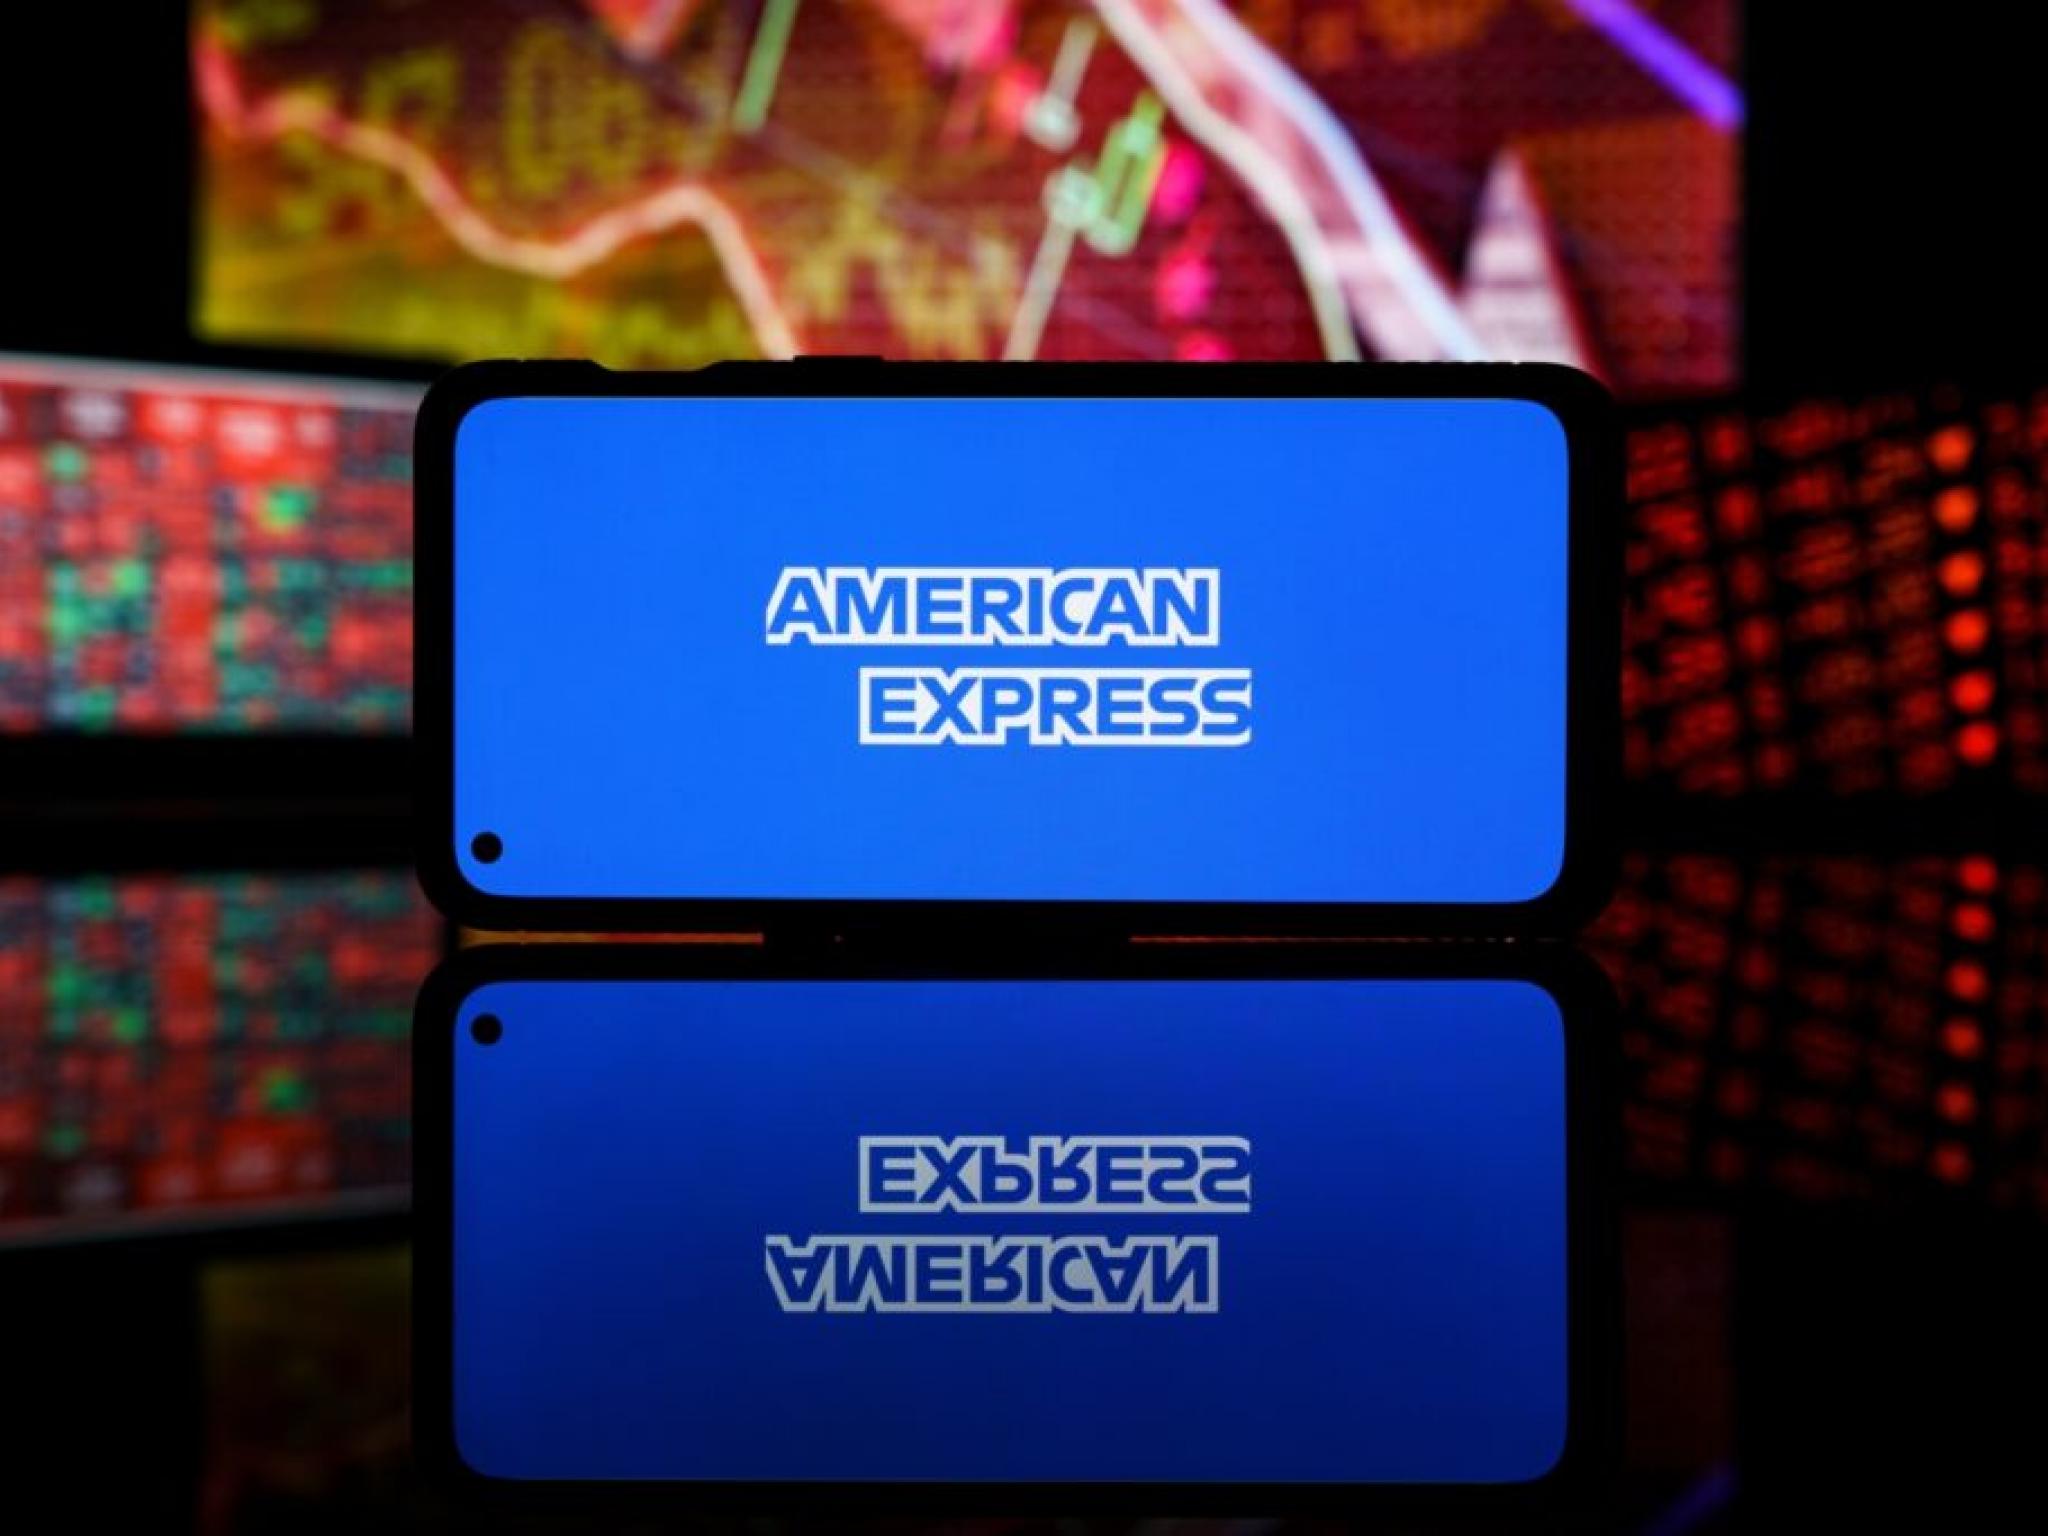  american-express-q1-wins-keep-analysts-steady-in-their-views 